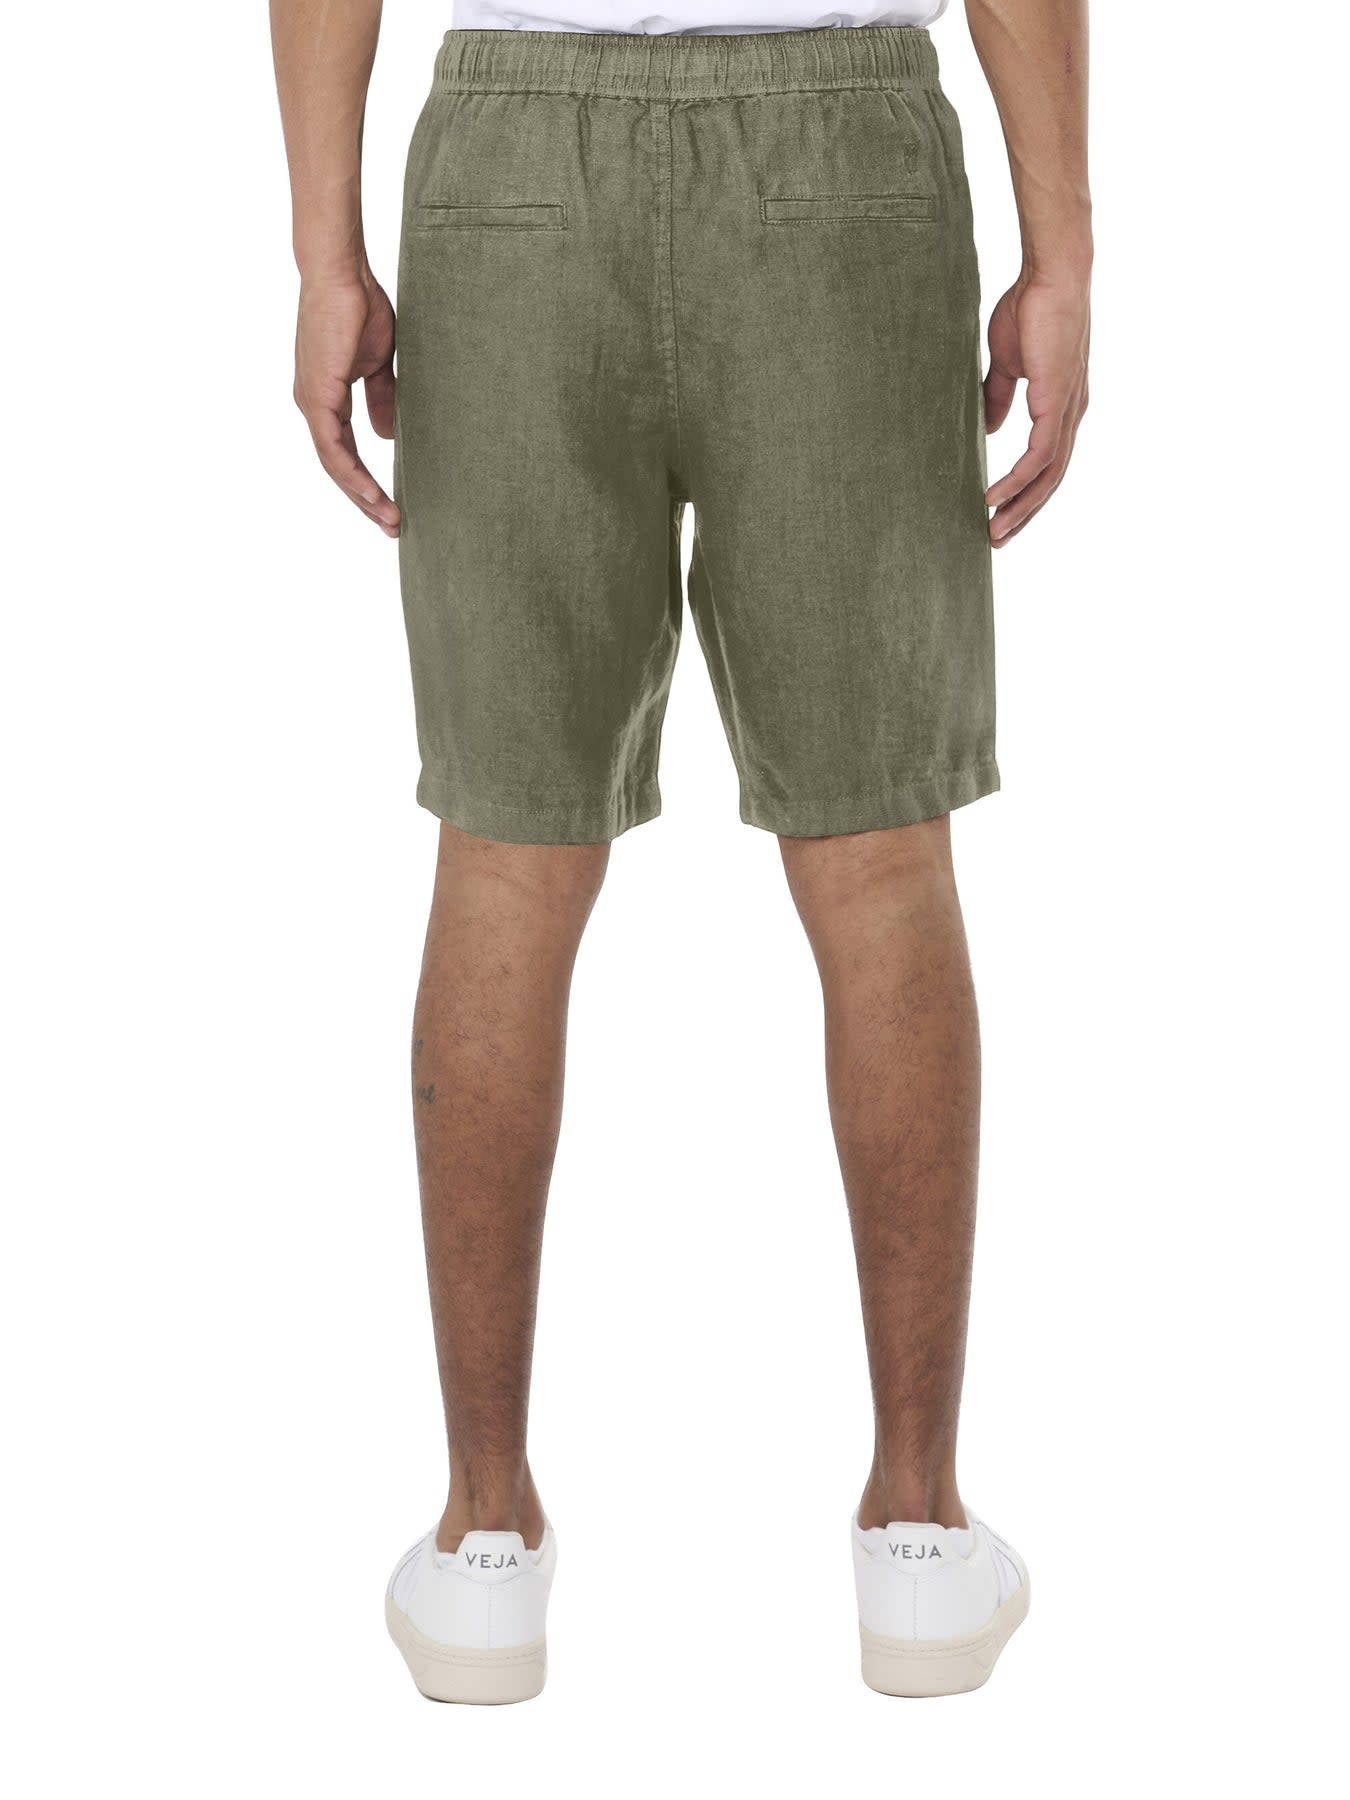 KnowledgeCotton Apparel KnowledgeCotton, Fig Loose Shorts, burned olive, S